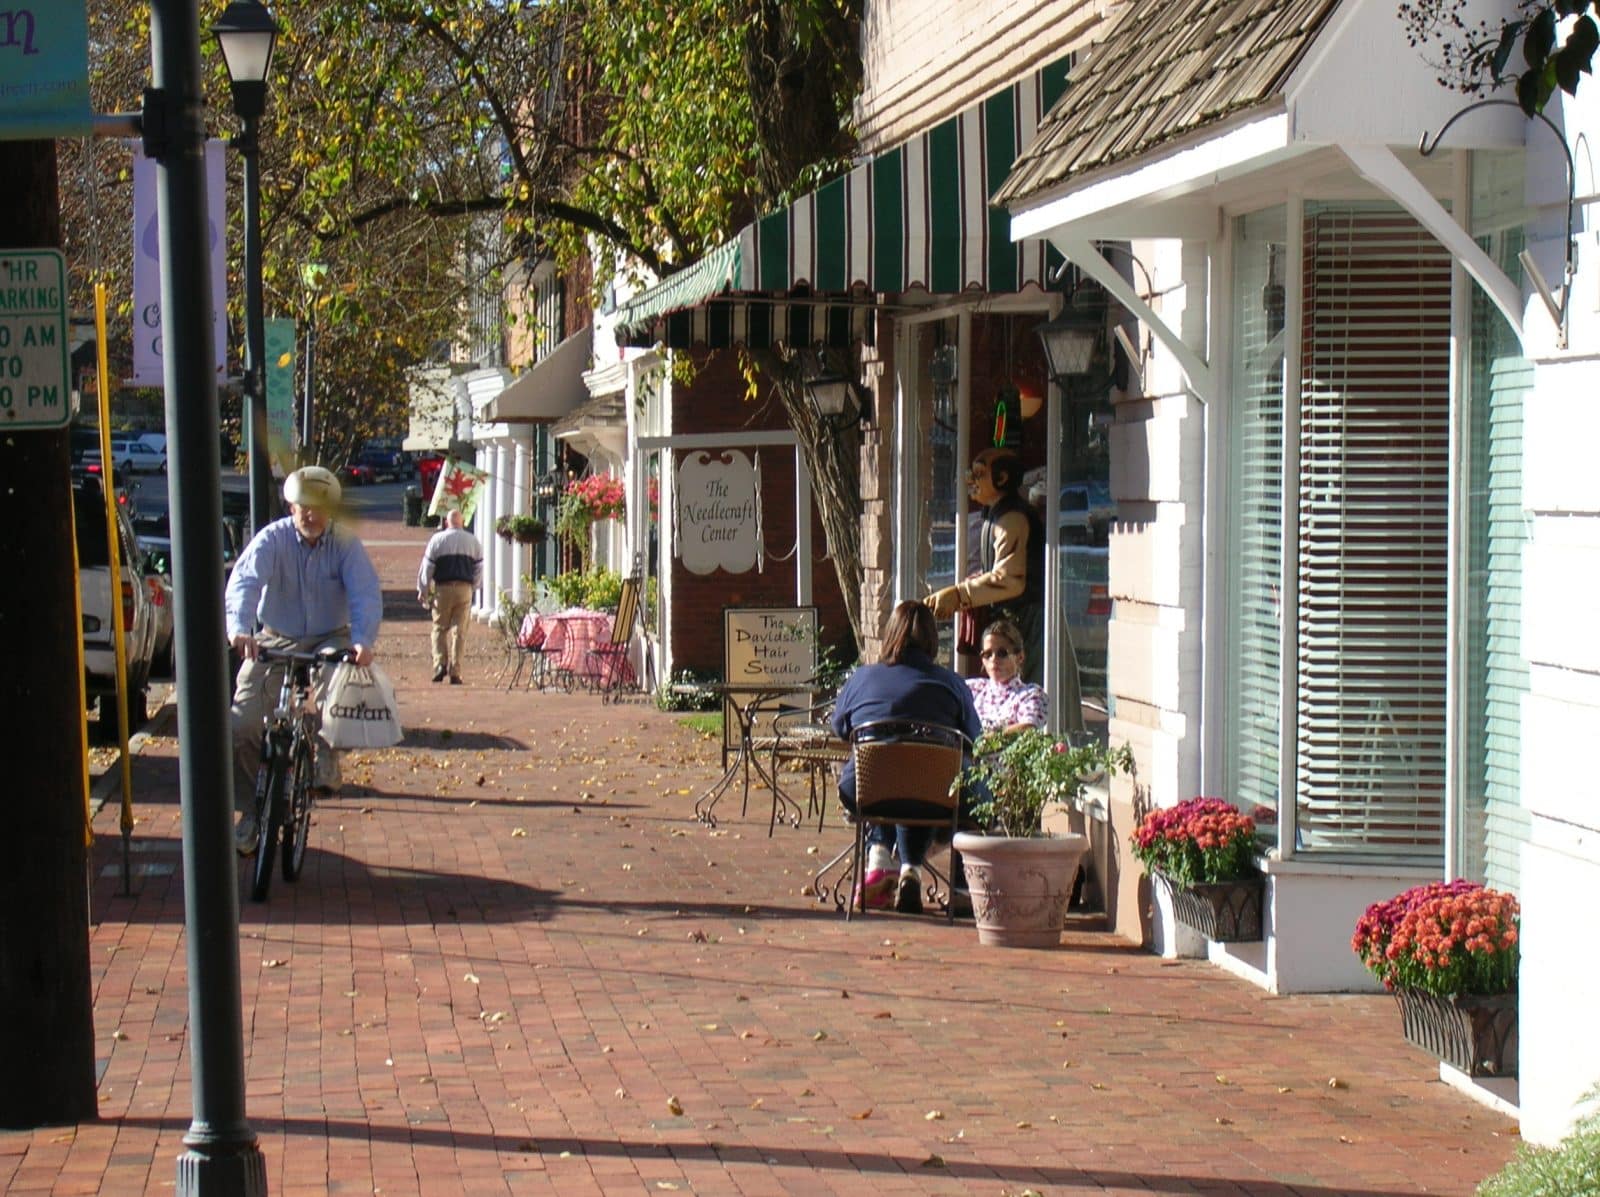 Things to do in downtown Davidson